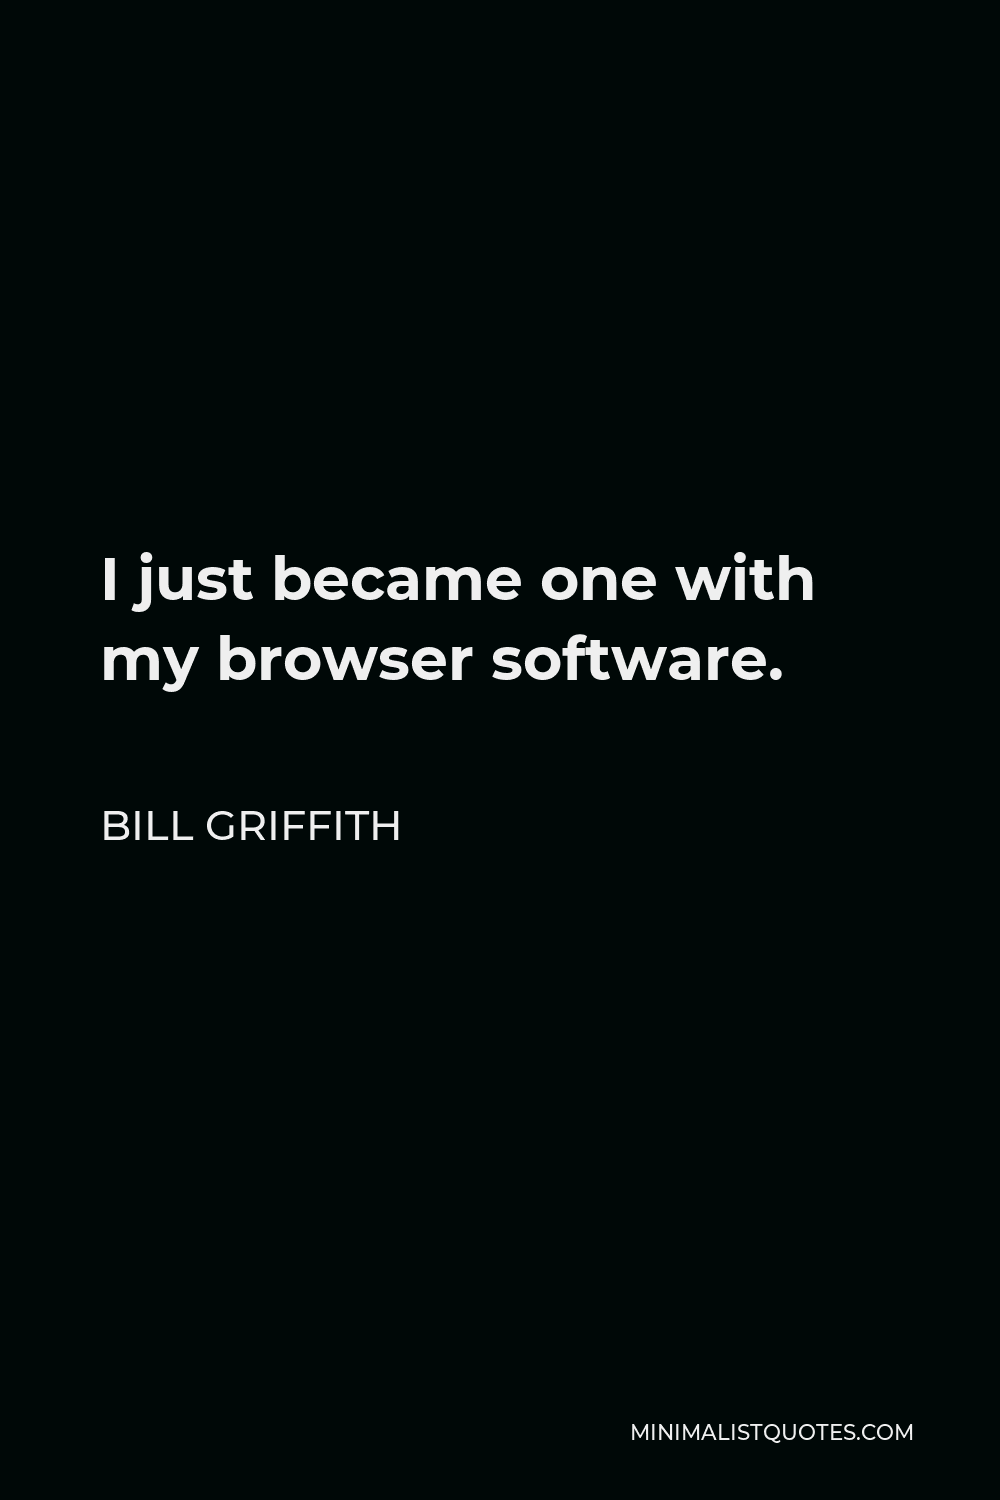 Bill Griffith Quote - I just became one with my browser software.